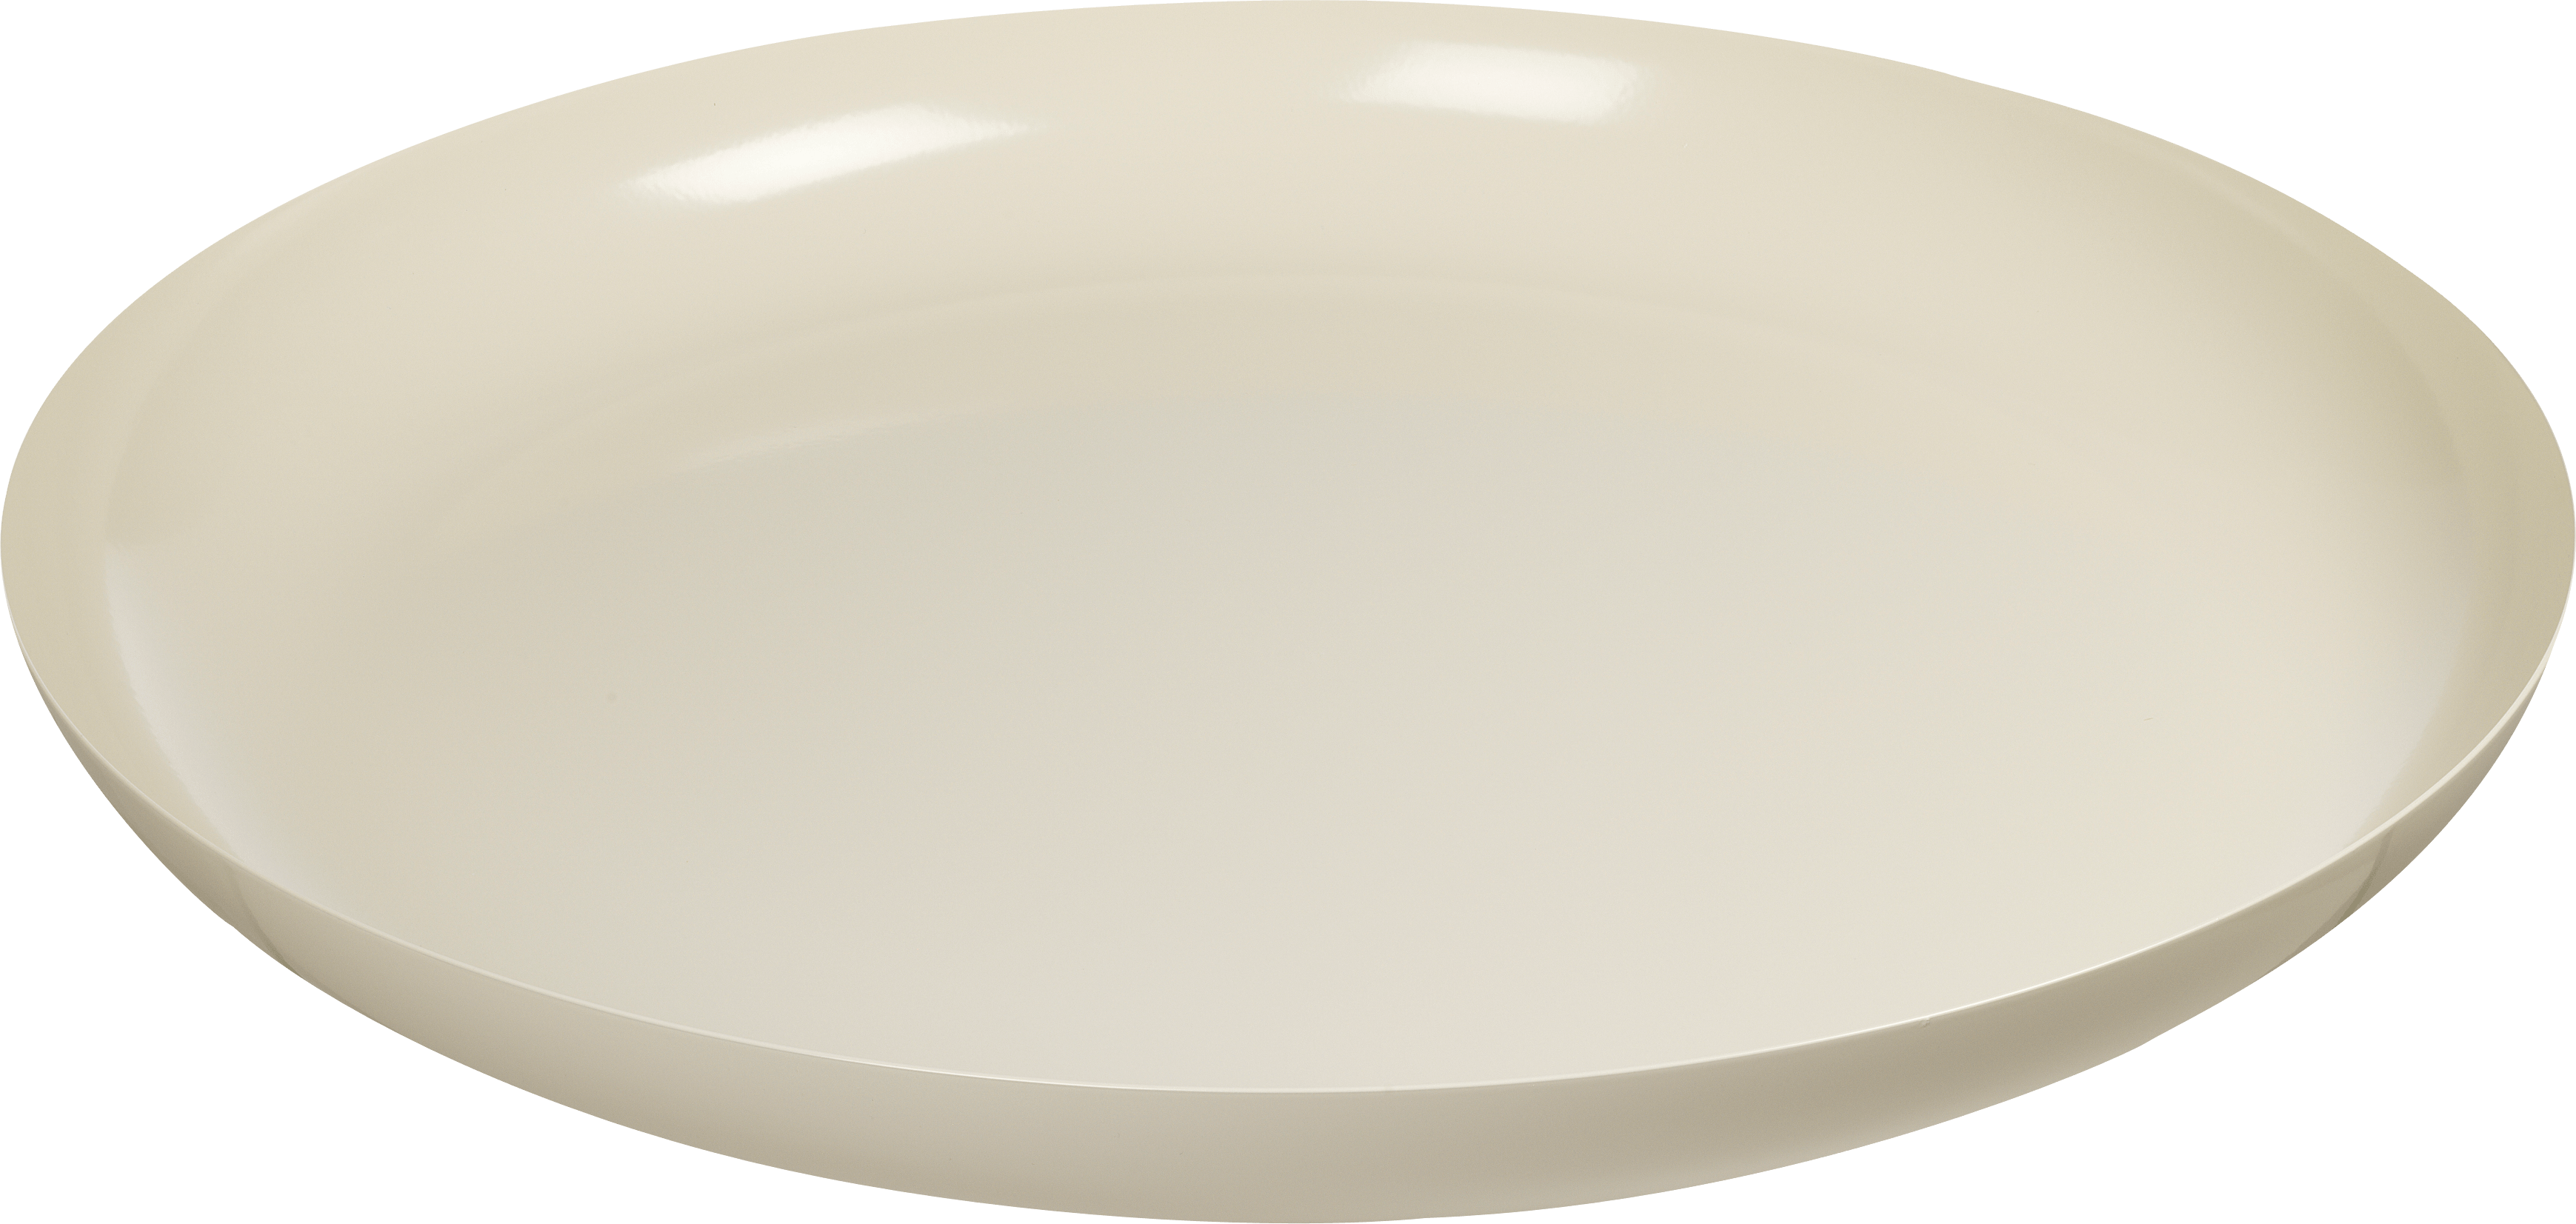  White  Plate  PNG Image PurePNG Free transparent  CC0 PNG 